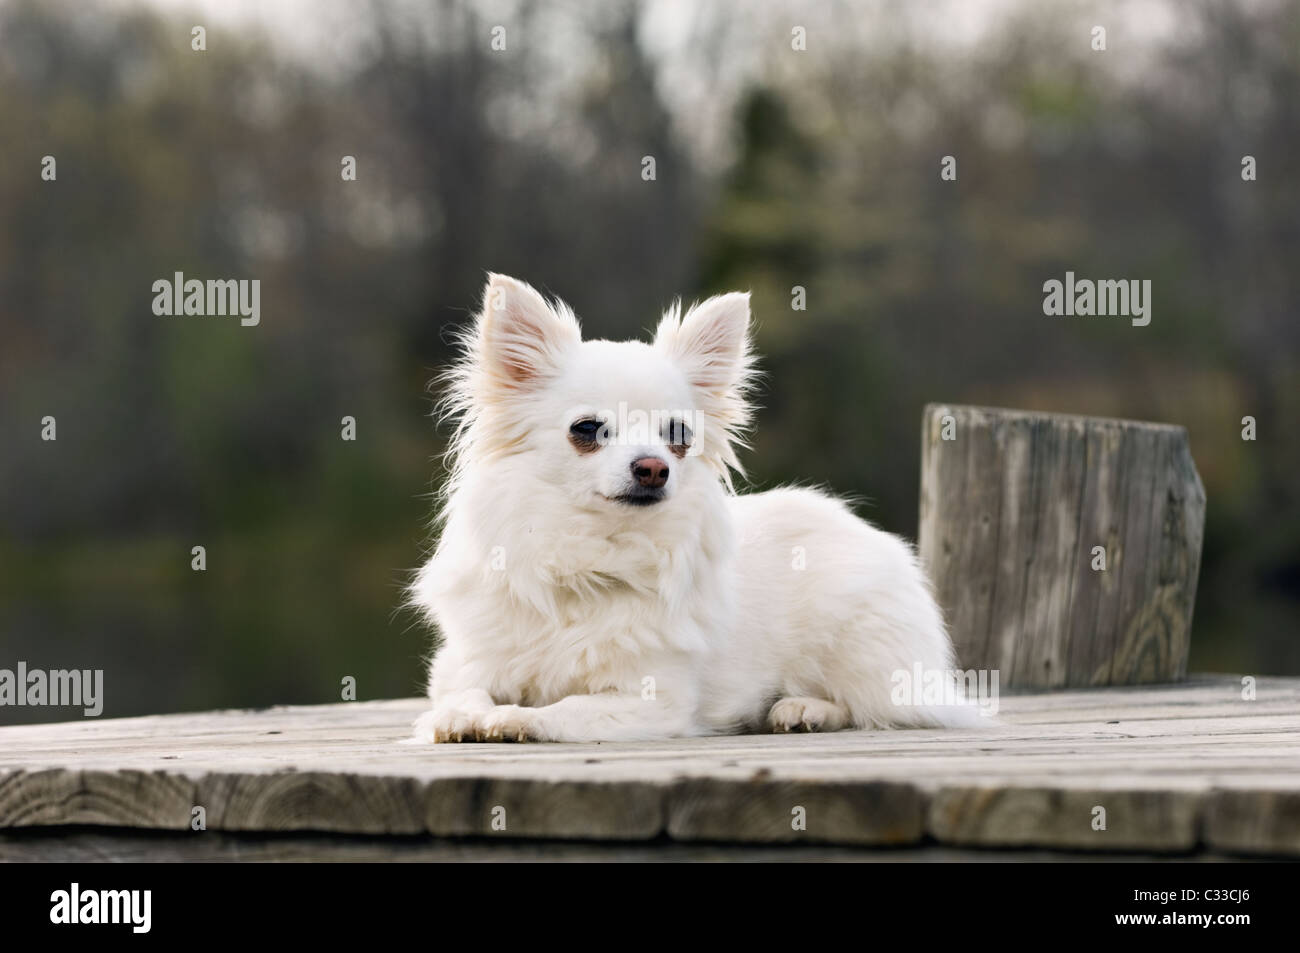 Long Haired Chihuahua Stock Photos Long Haired Chihuahua